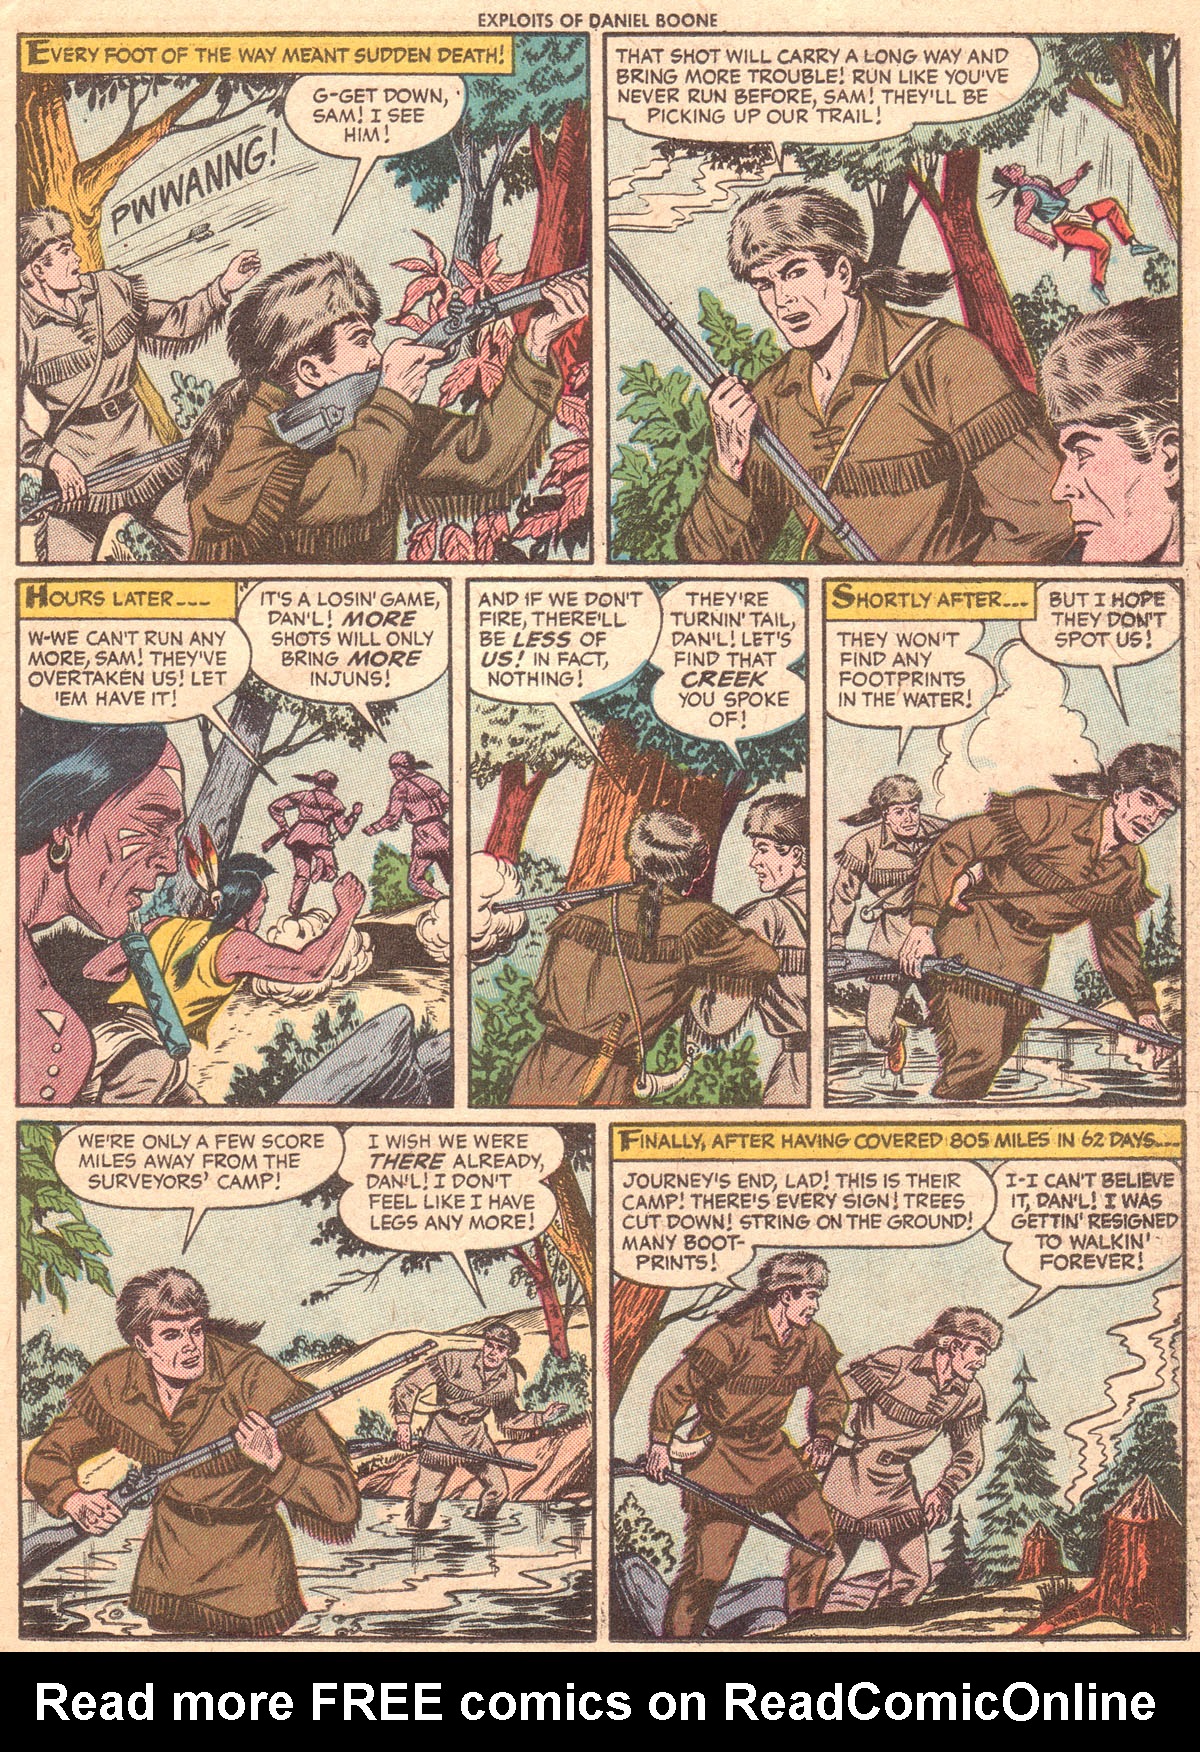 Read online Exploits of Daniel Boone comic -  Issue #5 - 23